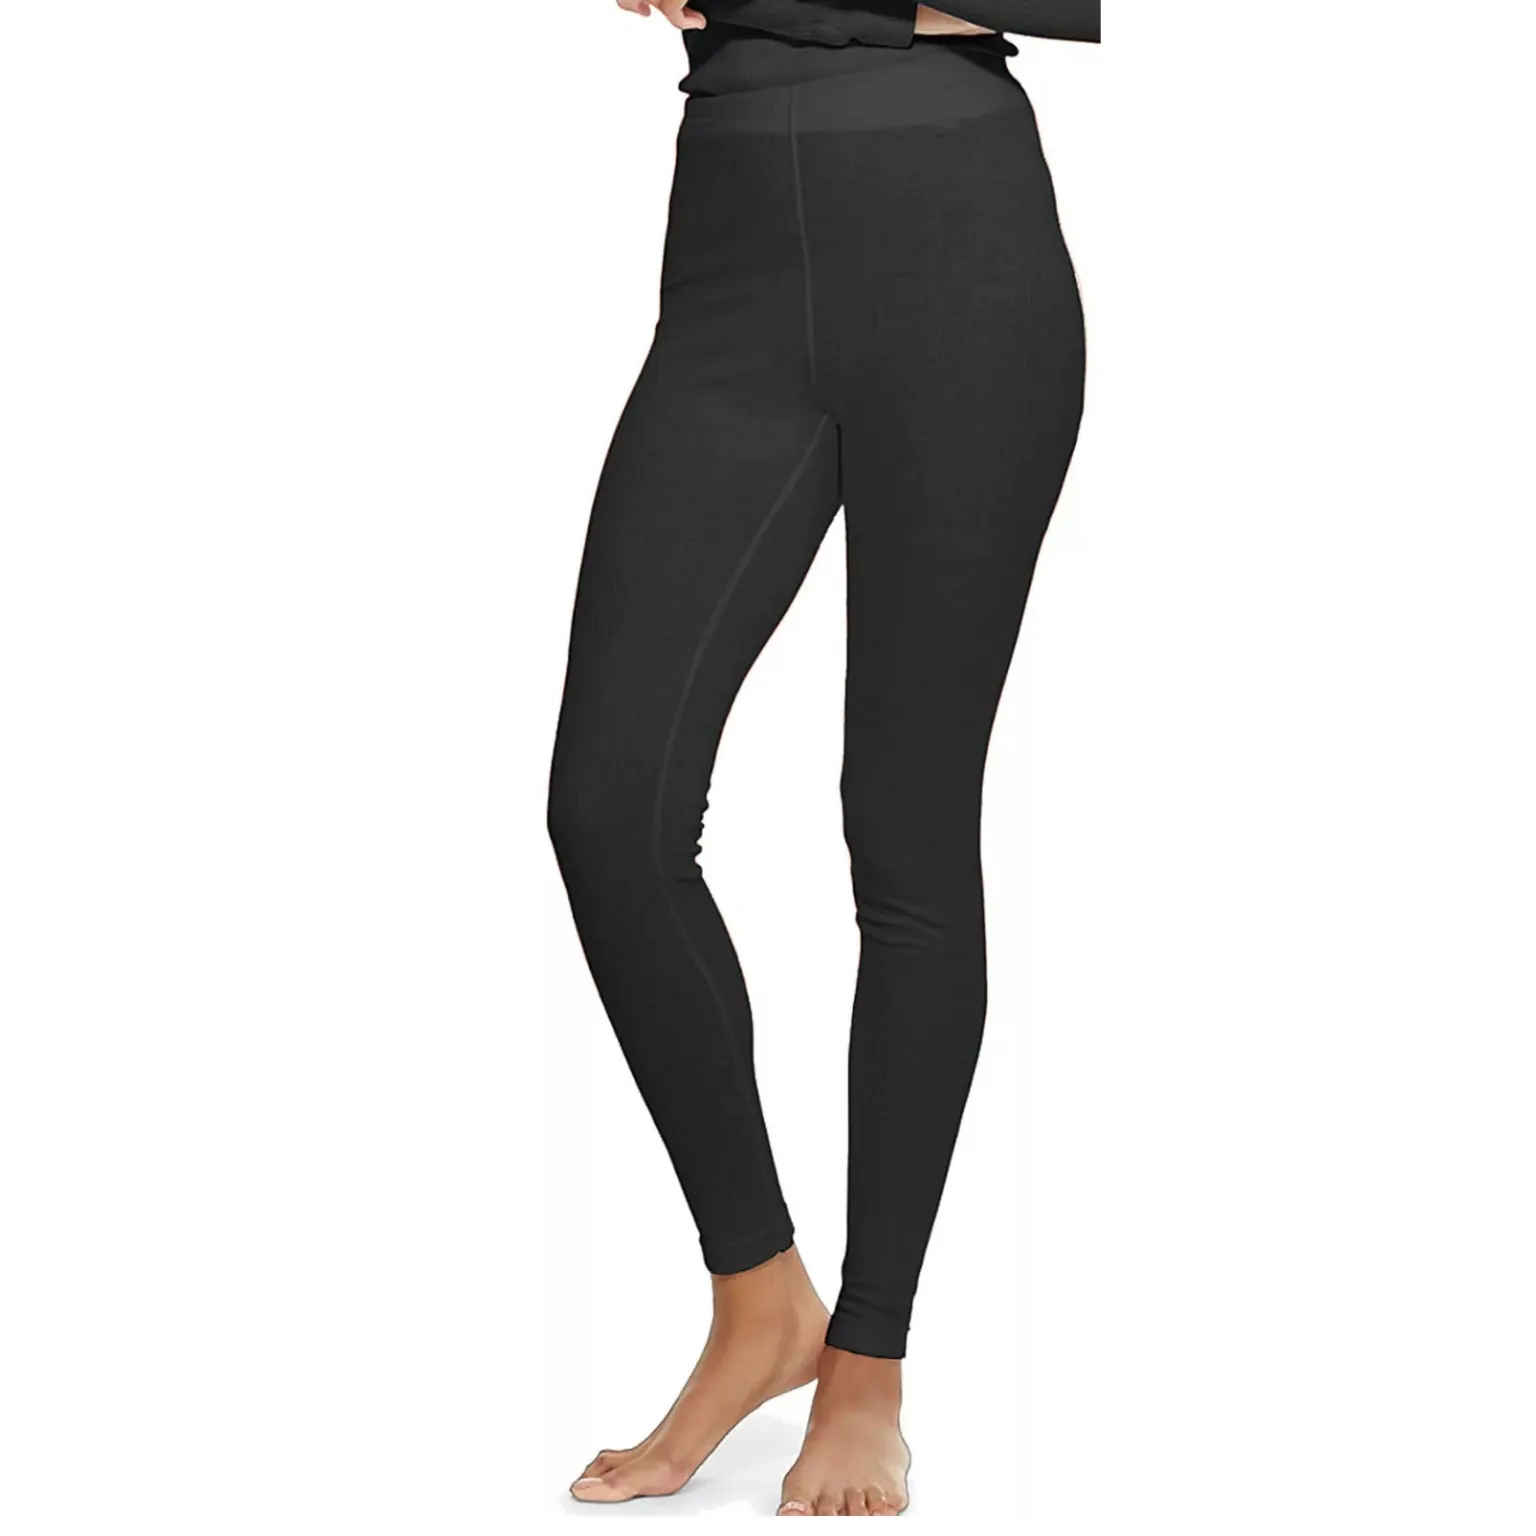 Women’s Long Johns with trendy design